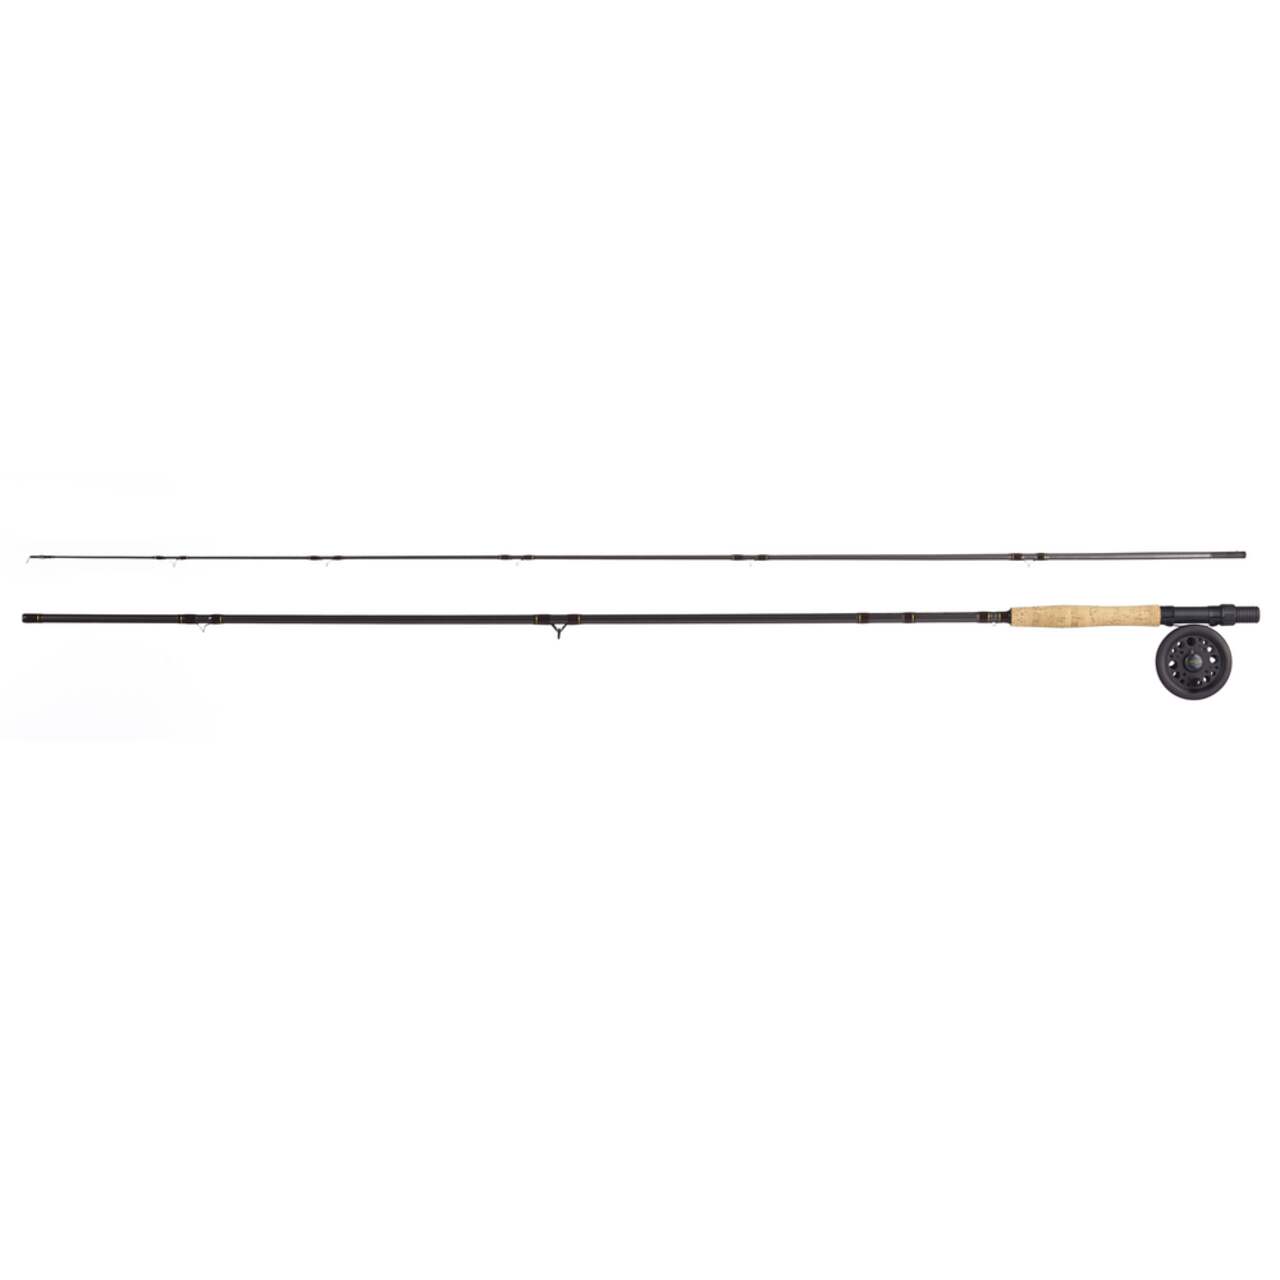 AnglerDream 9' 5WT Archer Fly Fishing Rod and EX-ALC Reel Combo 5